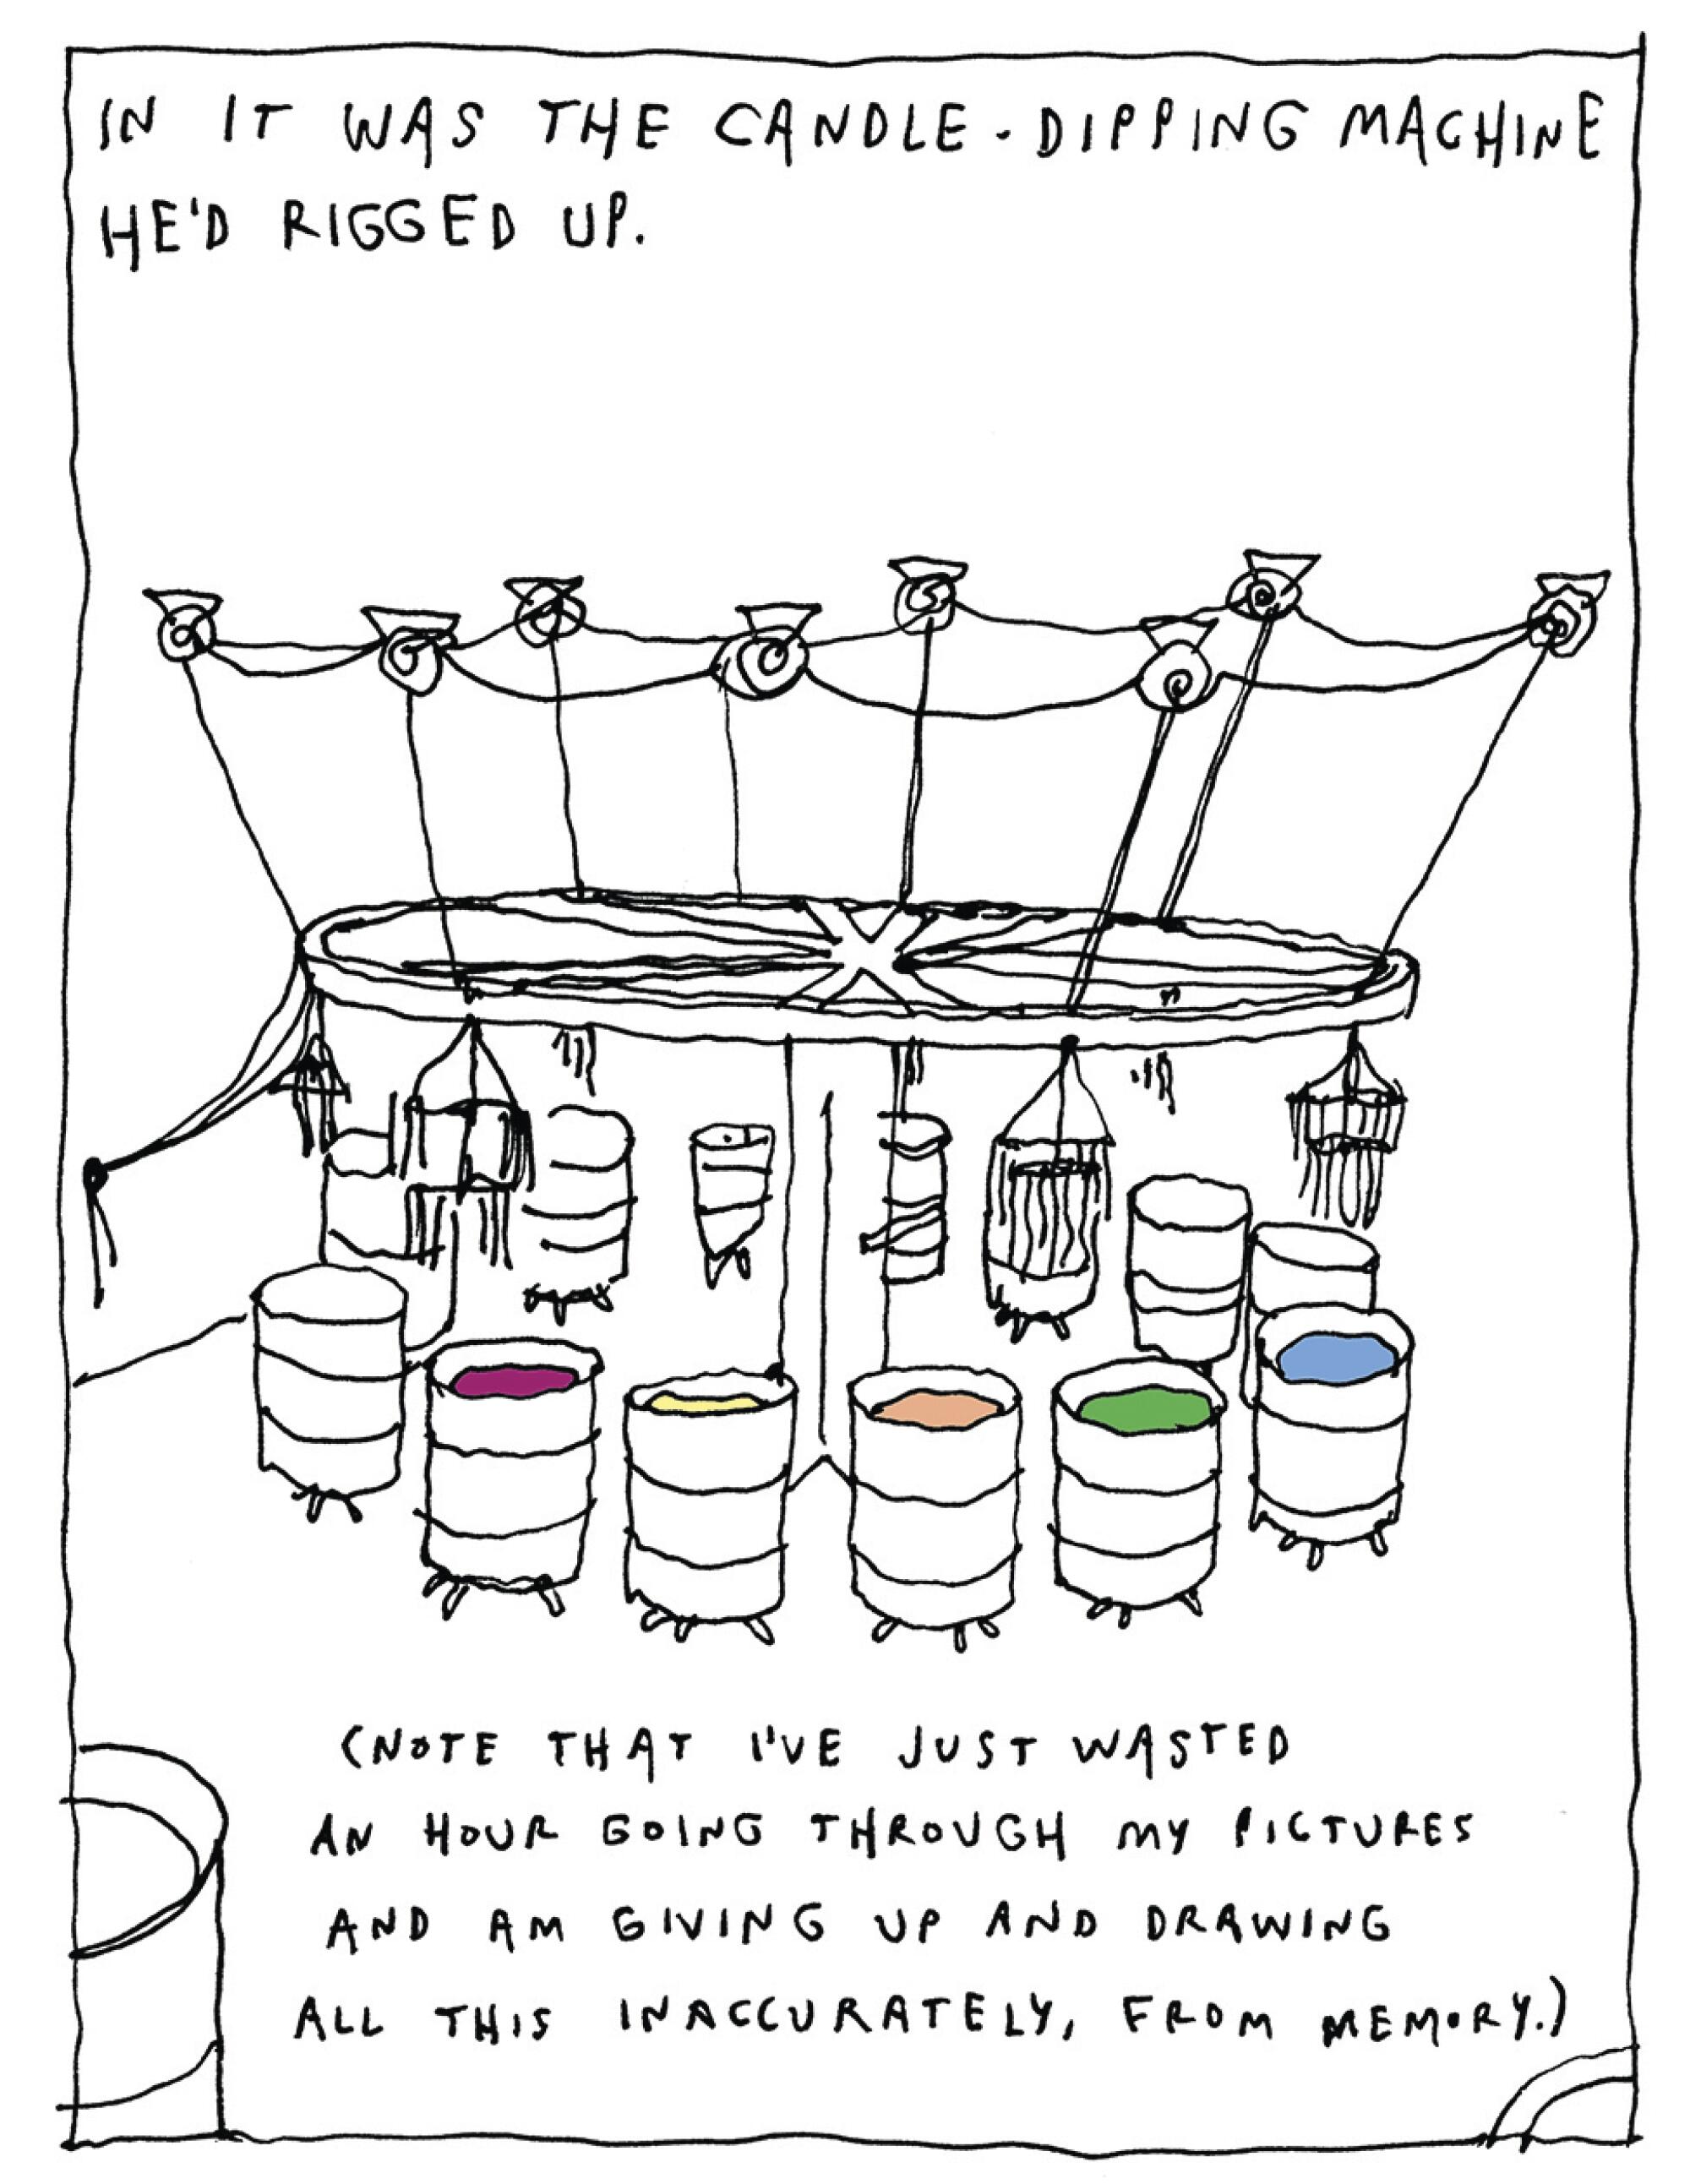 comic illustration of a candle dipping machine with rainbow colors